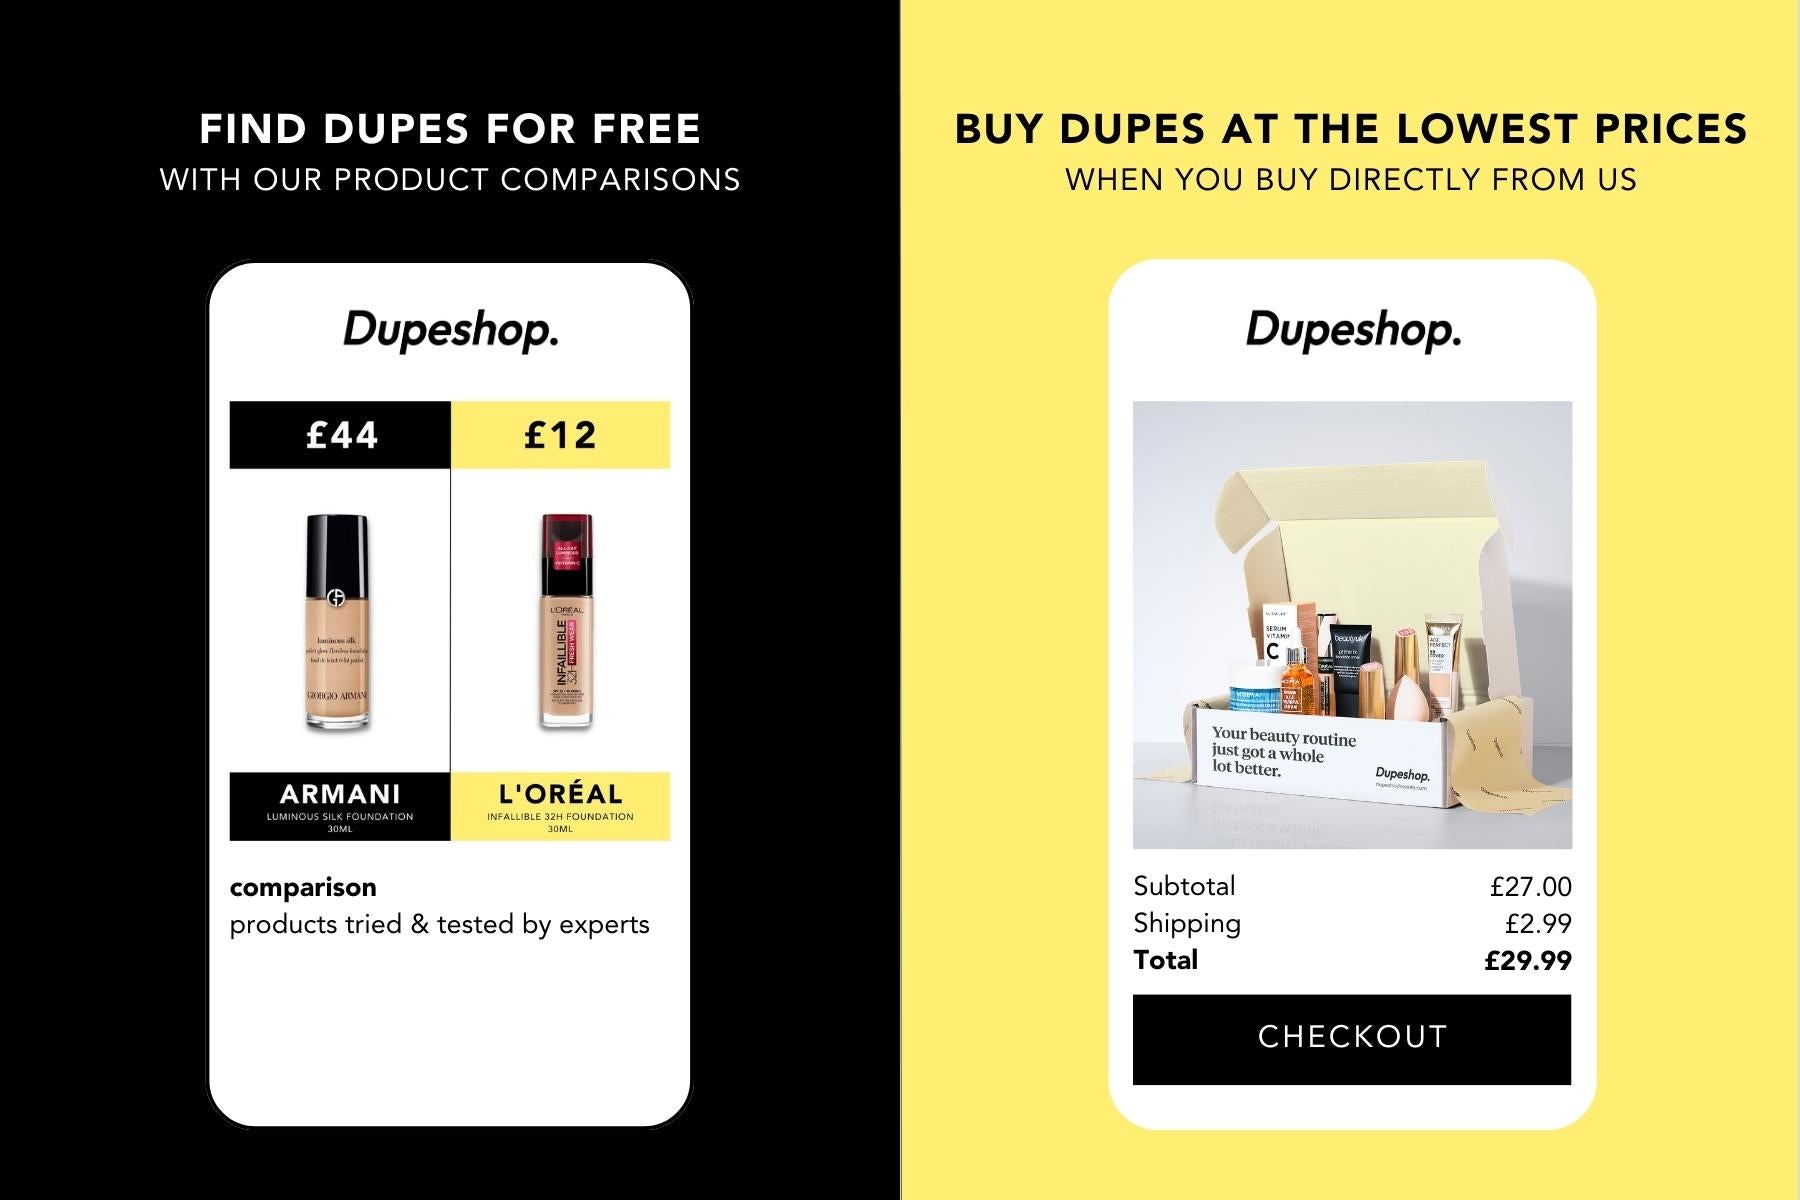 Dupes